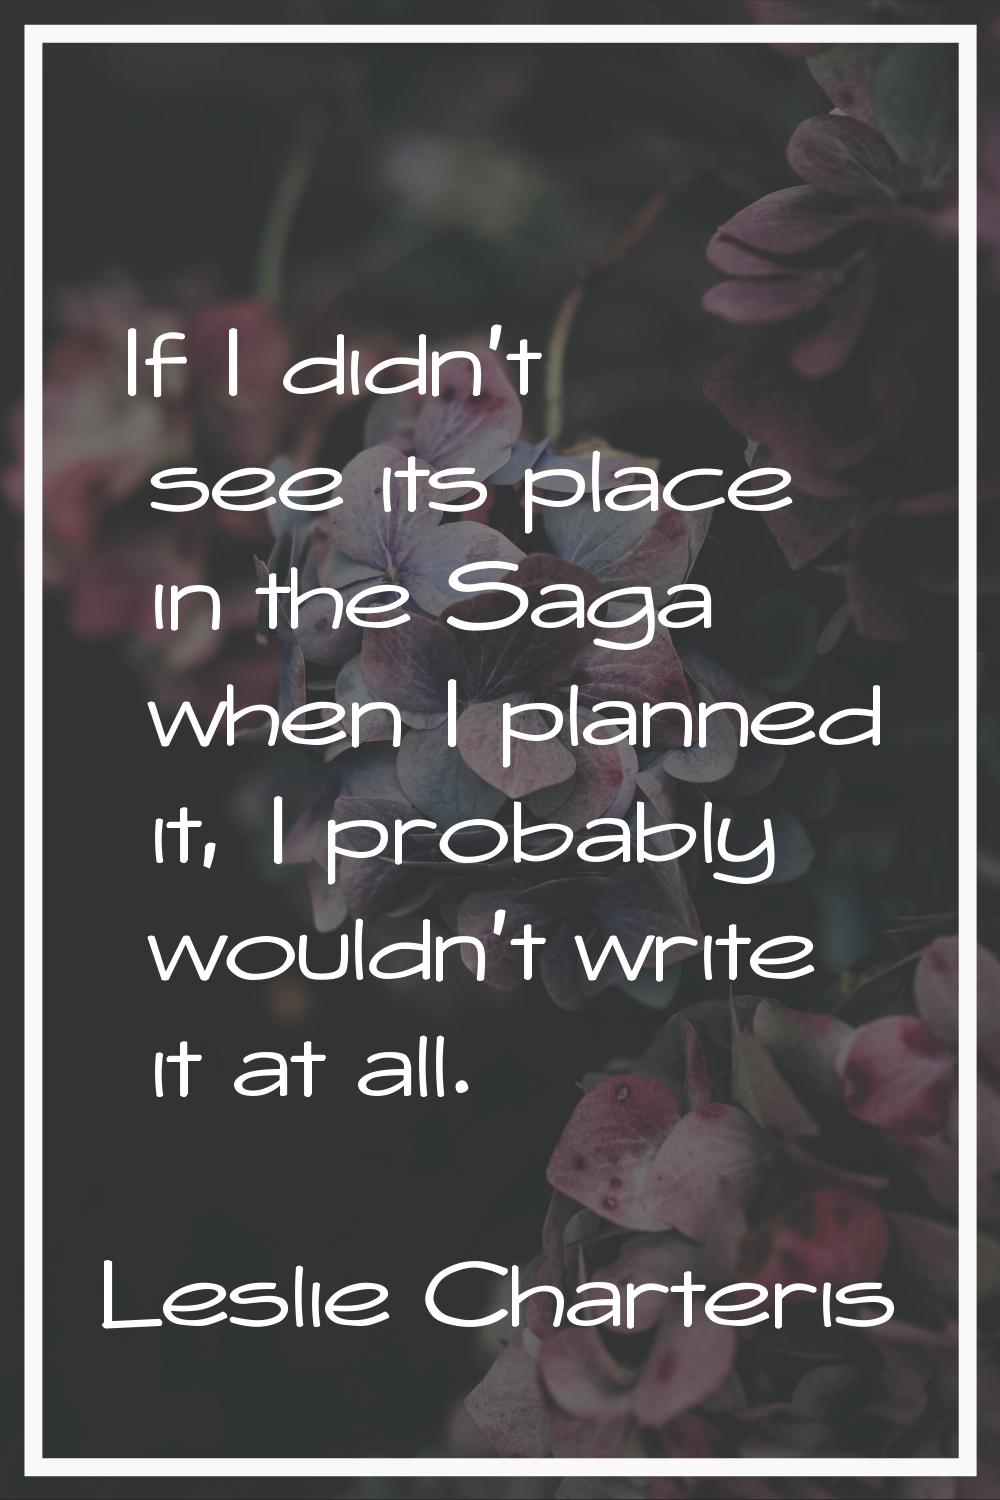 If I didn't see its place in the Saga when I planned it, I probably wouldn't write it at all.